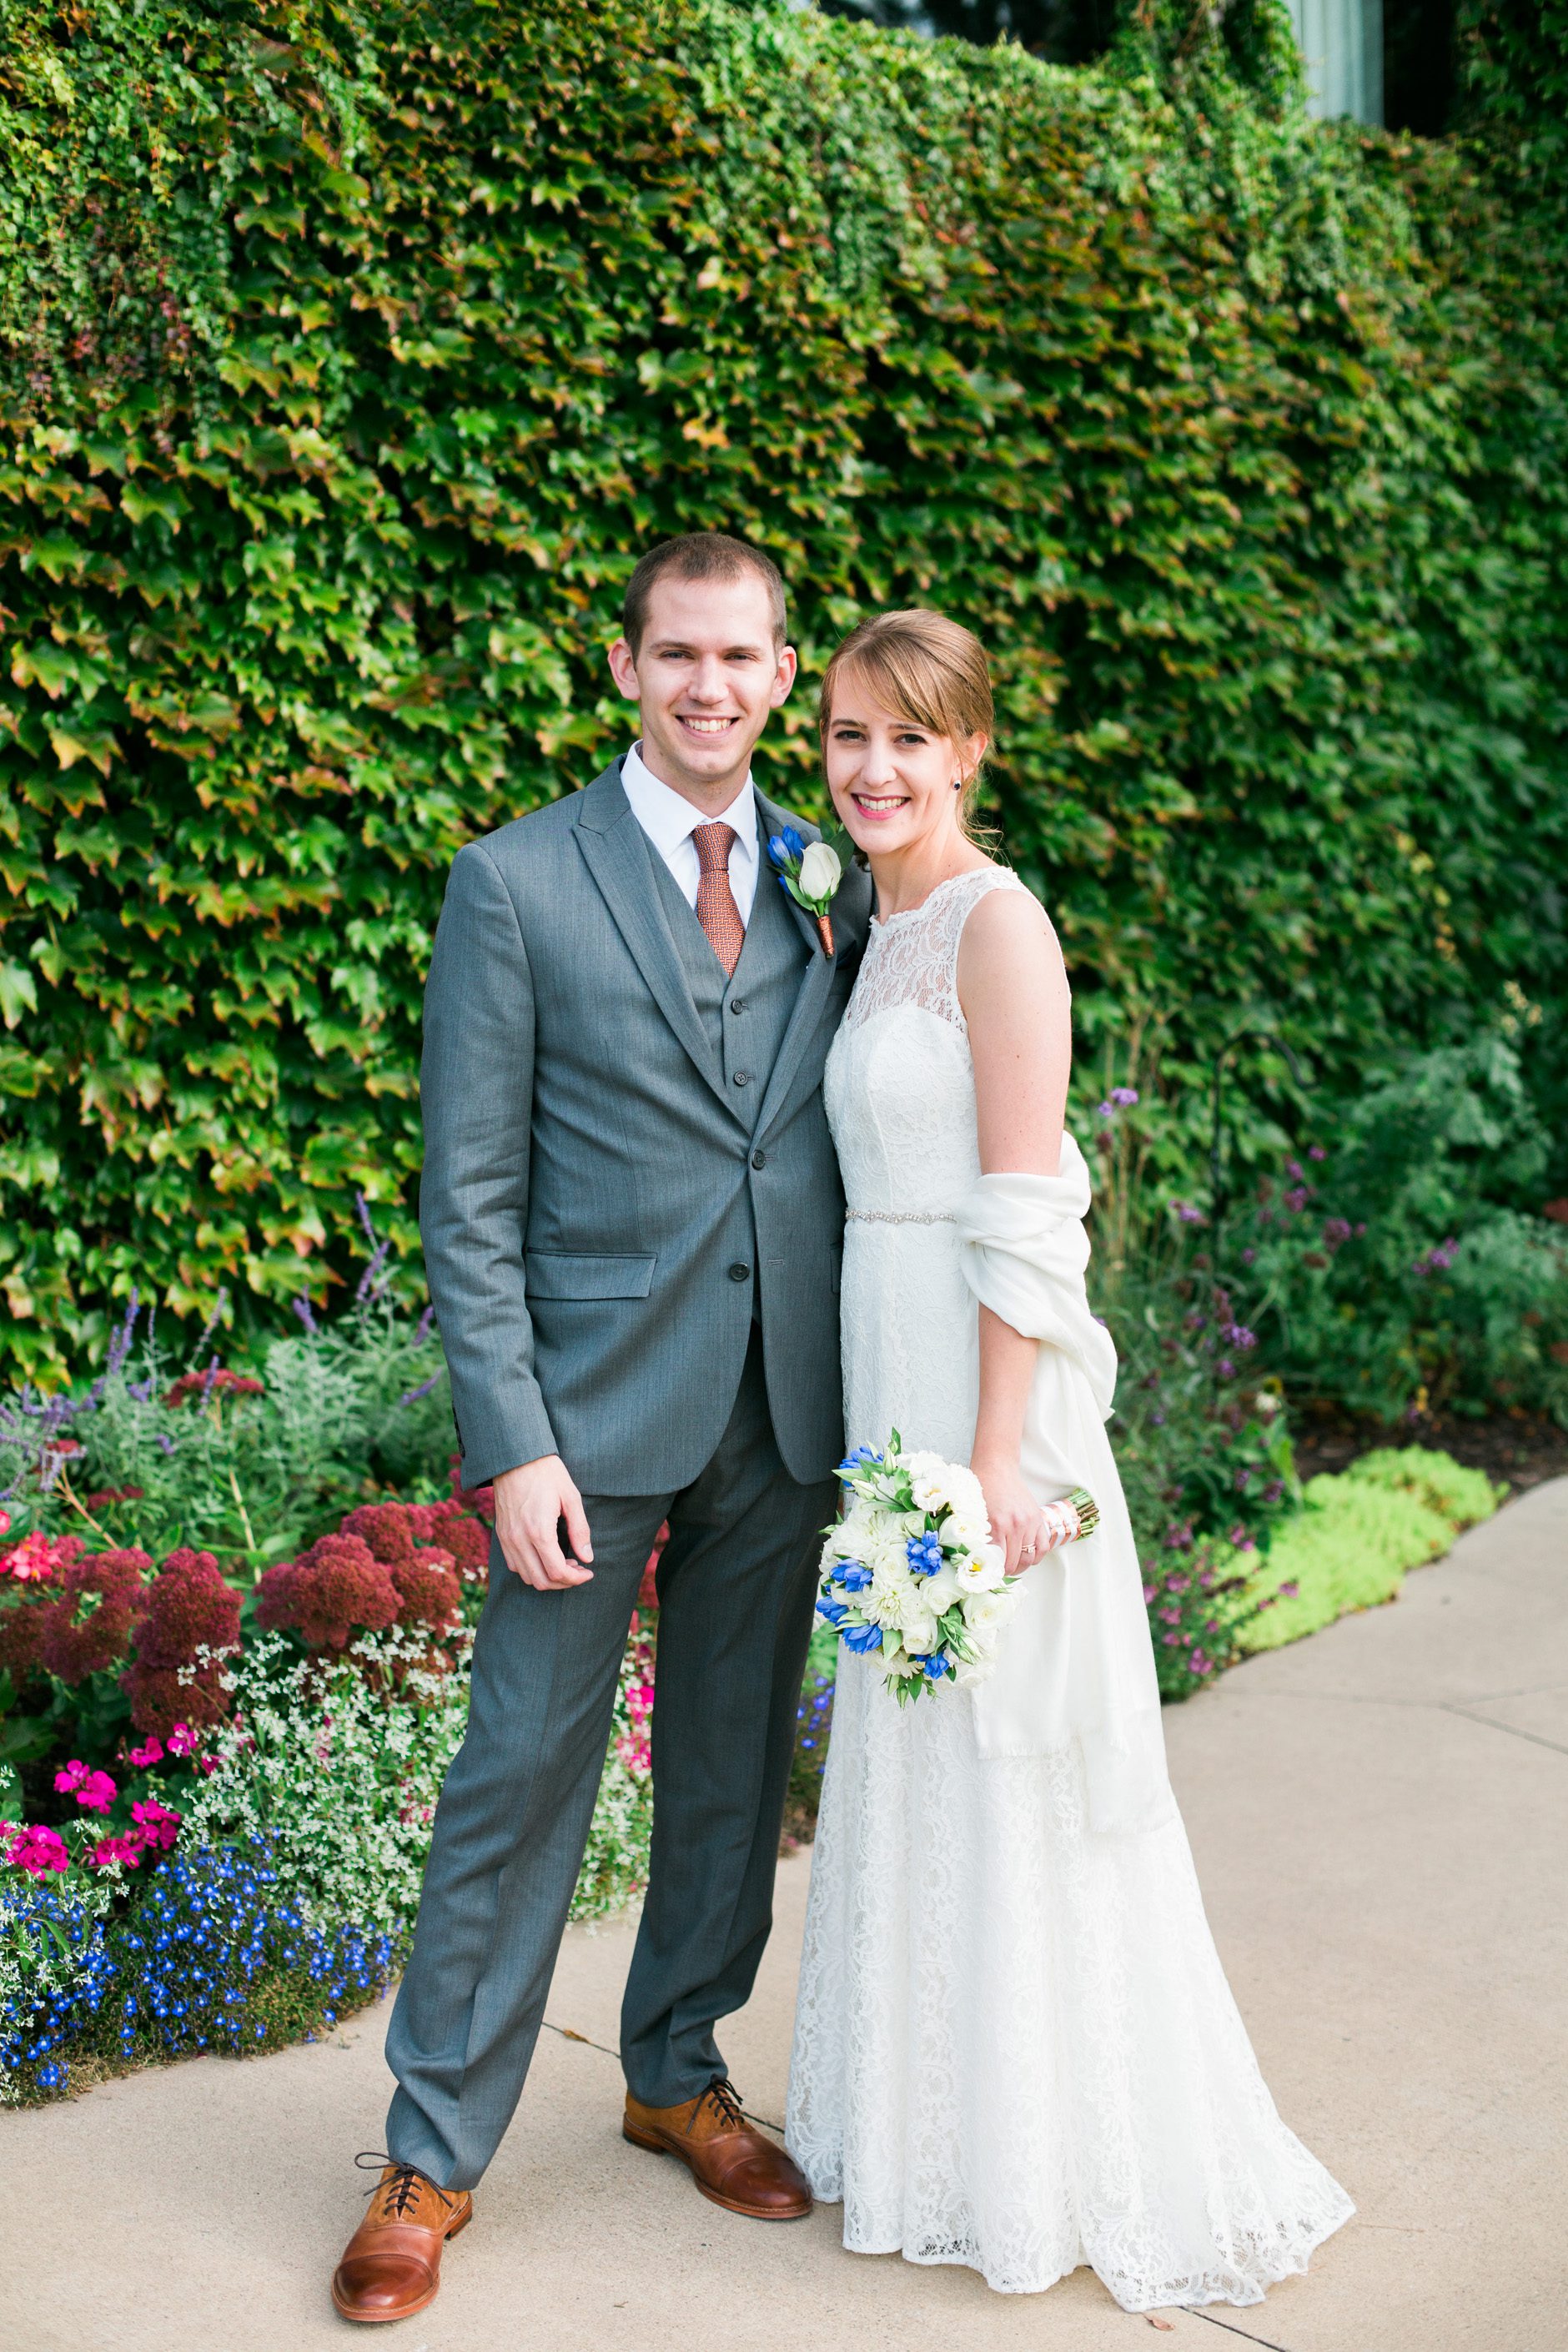 eileenkphoto-wedding-town-and-country-club-4957